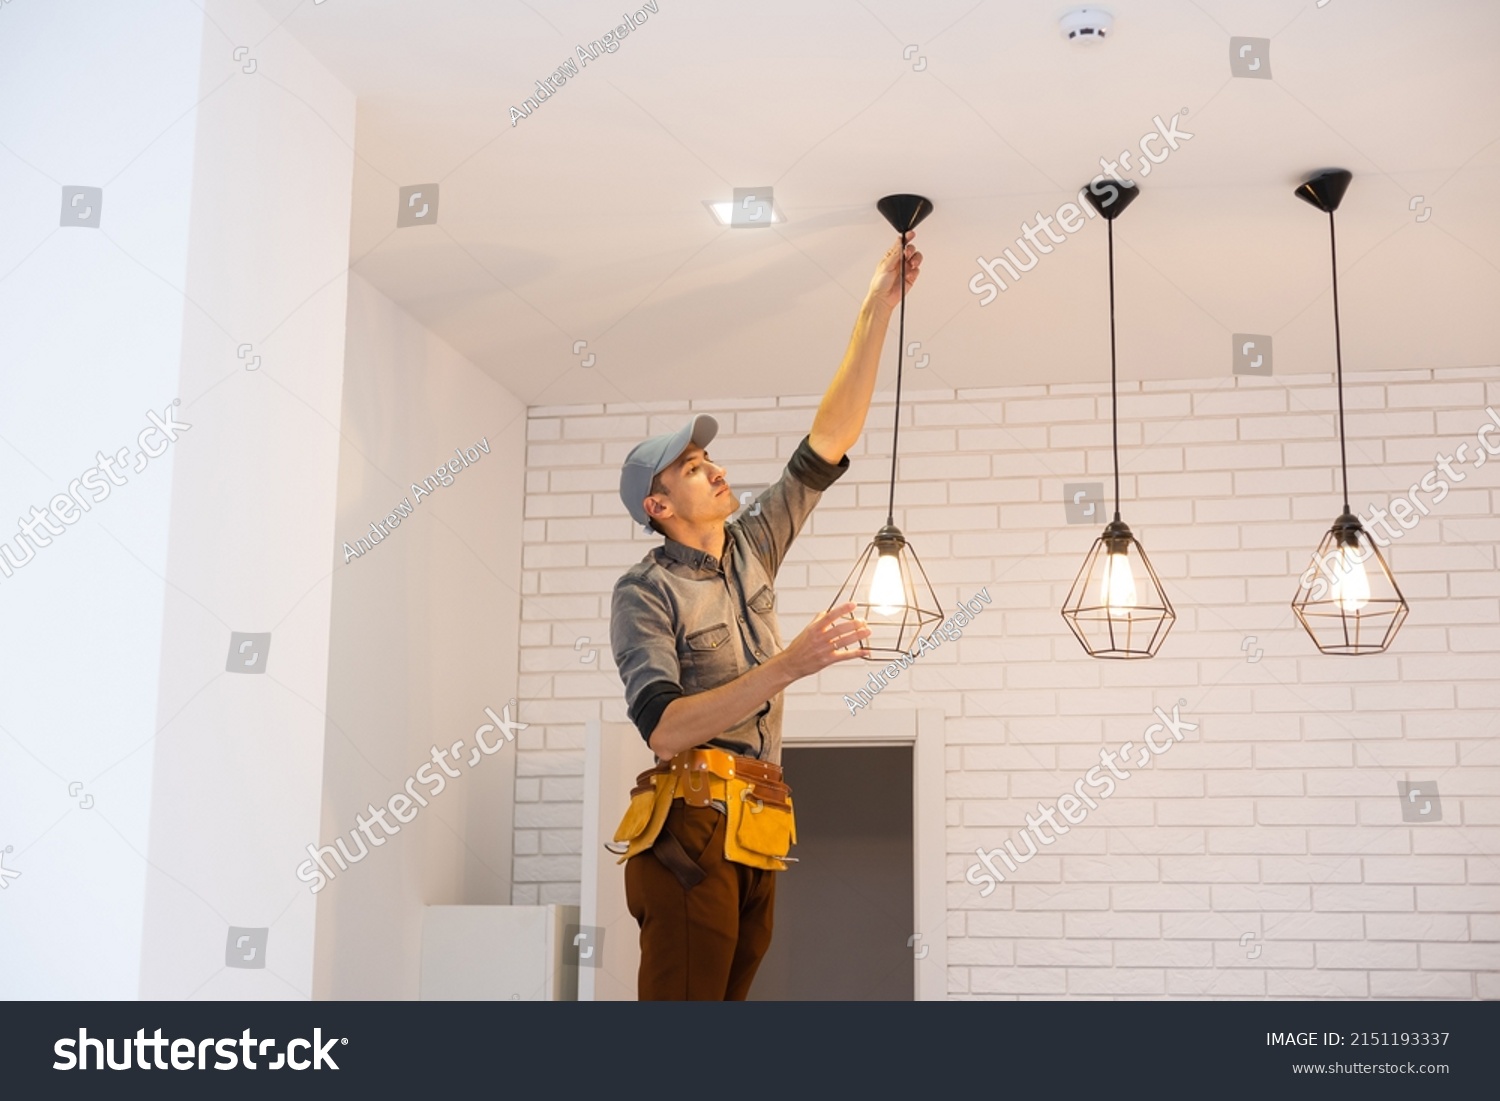 Electrician worker installation electric lamps light inside apartment. Construction decoration concept. #2151193337